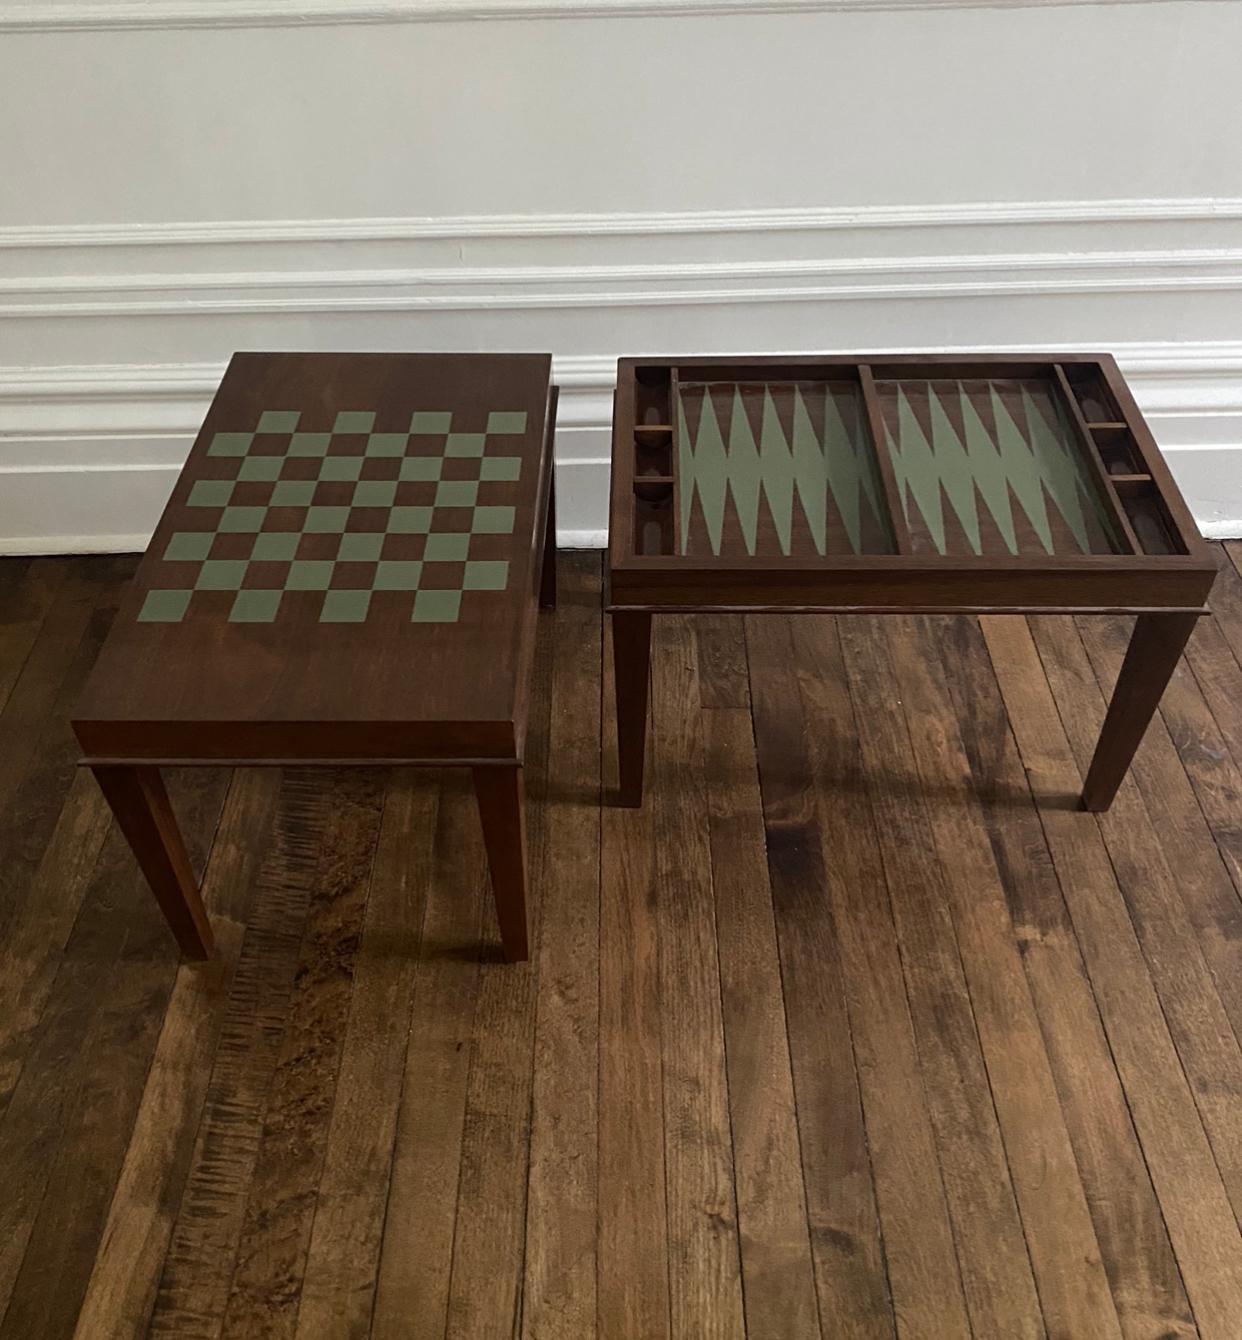 Made to order in any height up to 29”. As shown, 14” to be used as side tables / cocktail tables. Mahogany or walnut, with hand painted game surface in any BM or Pantone color of your choice. Made in Brooklyn by a family of artisans. Shipping price